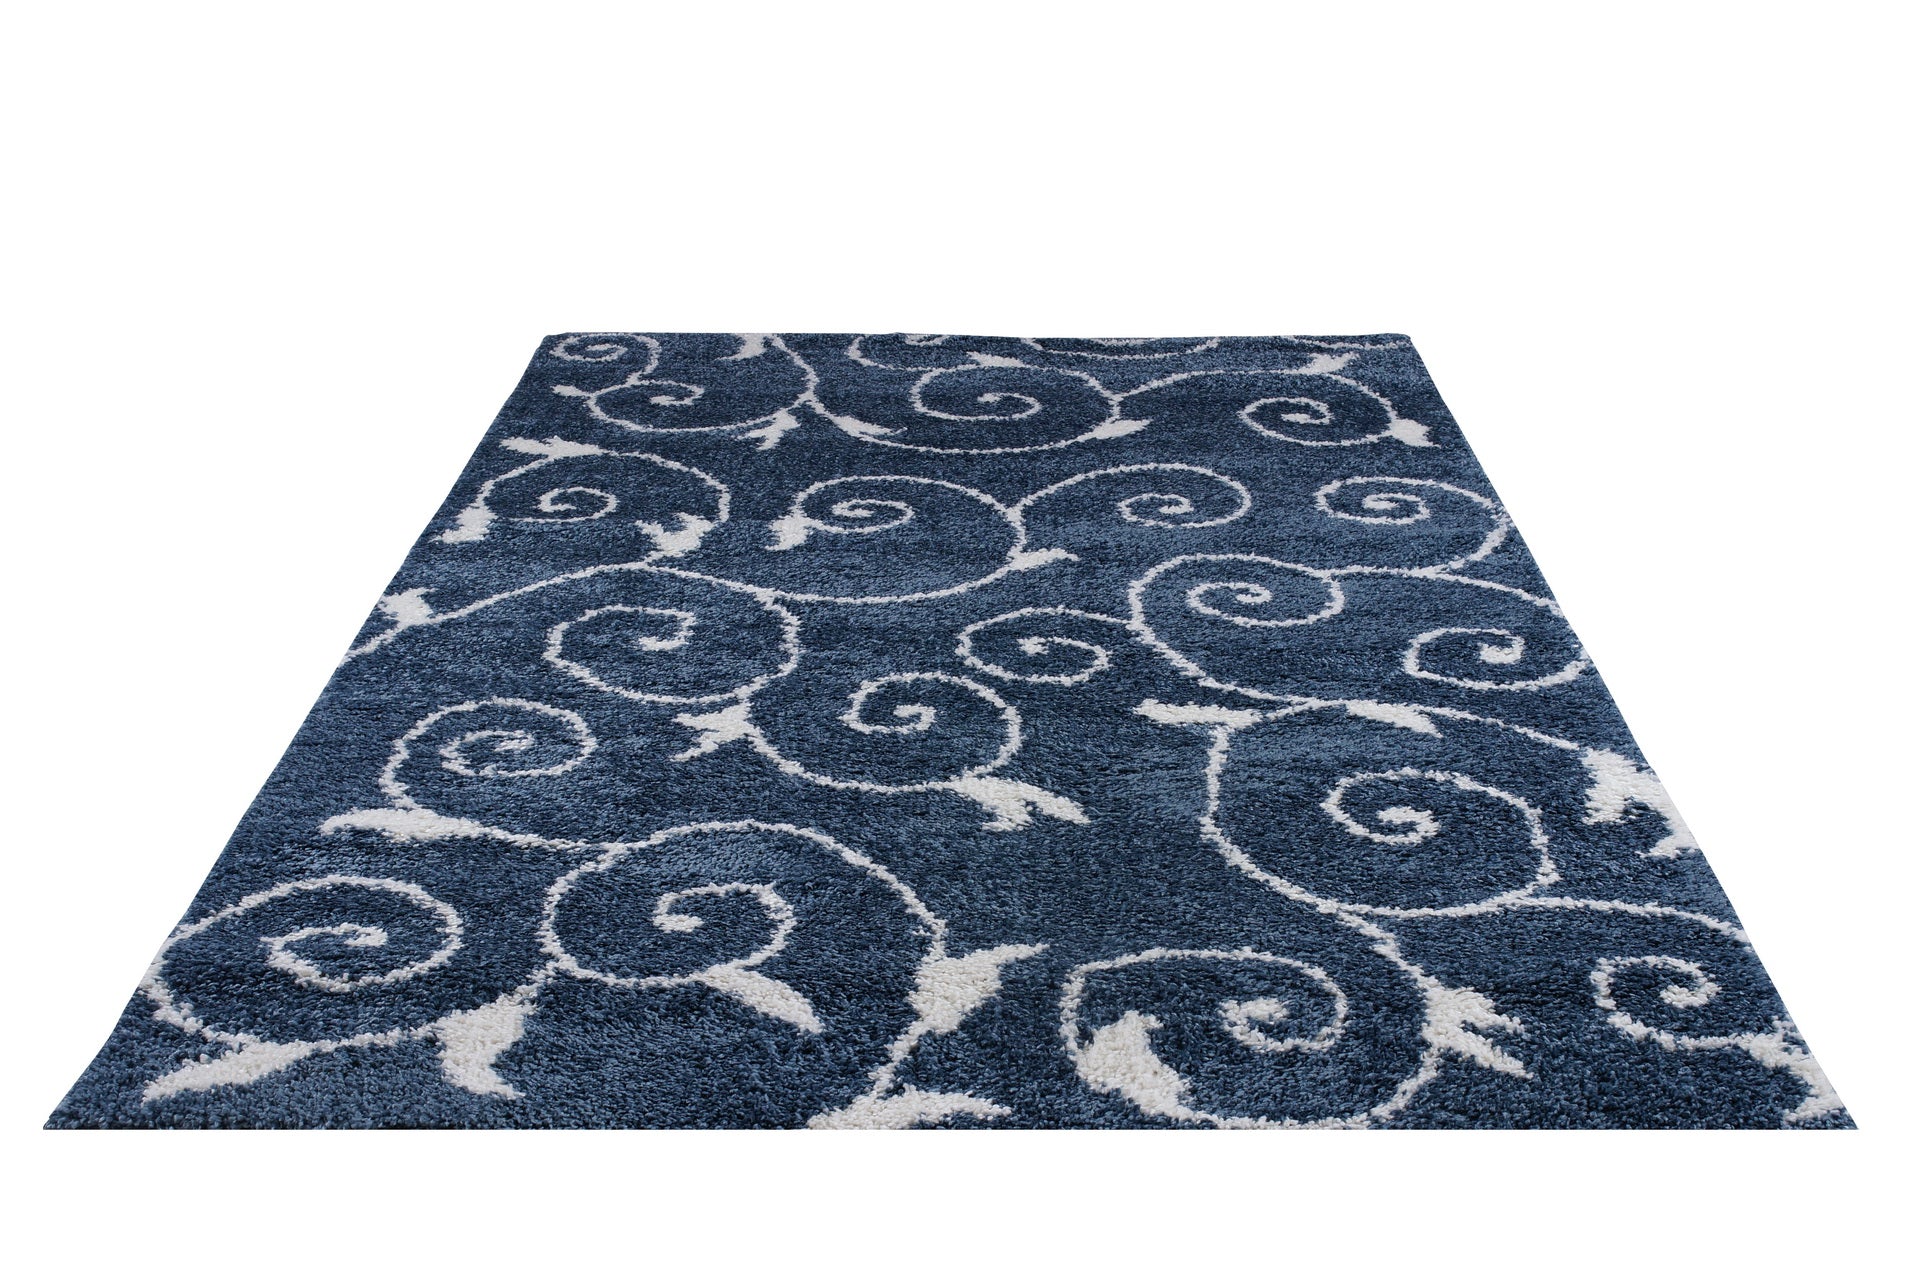 ladole rugs shaggy rabat abstract pattern sustainable spirals style indoor small mat doormat rug in blue white 110 x 211 57cm x 90cm 6x8, 6x9 ft Living Room, Bedroom, Dining Area, Kitchen Carpet